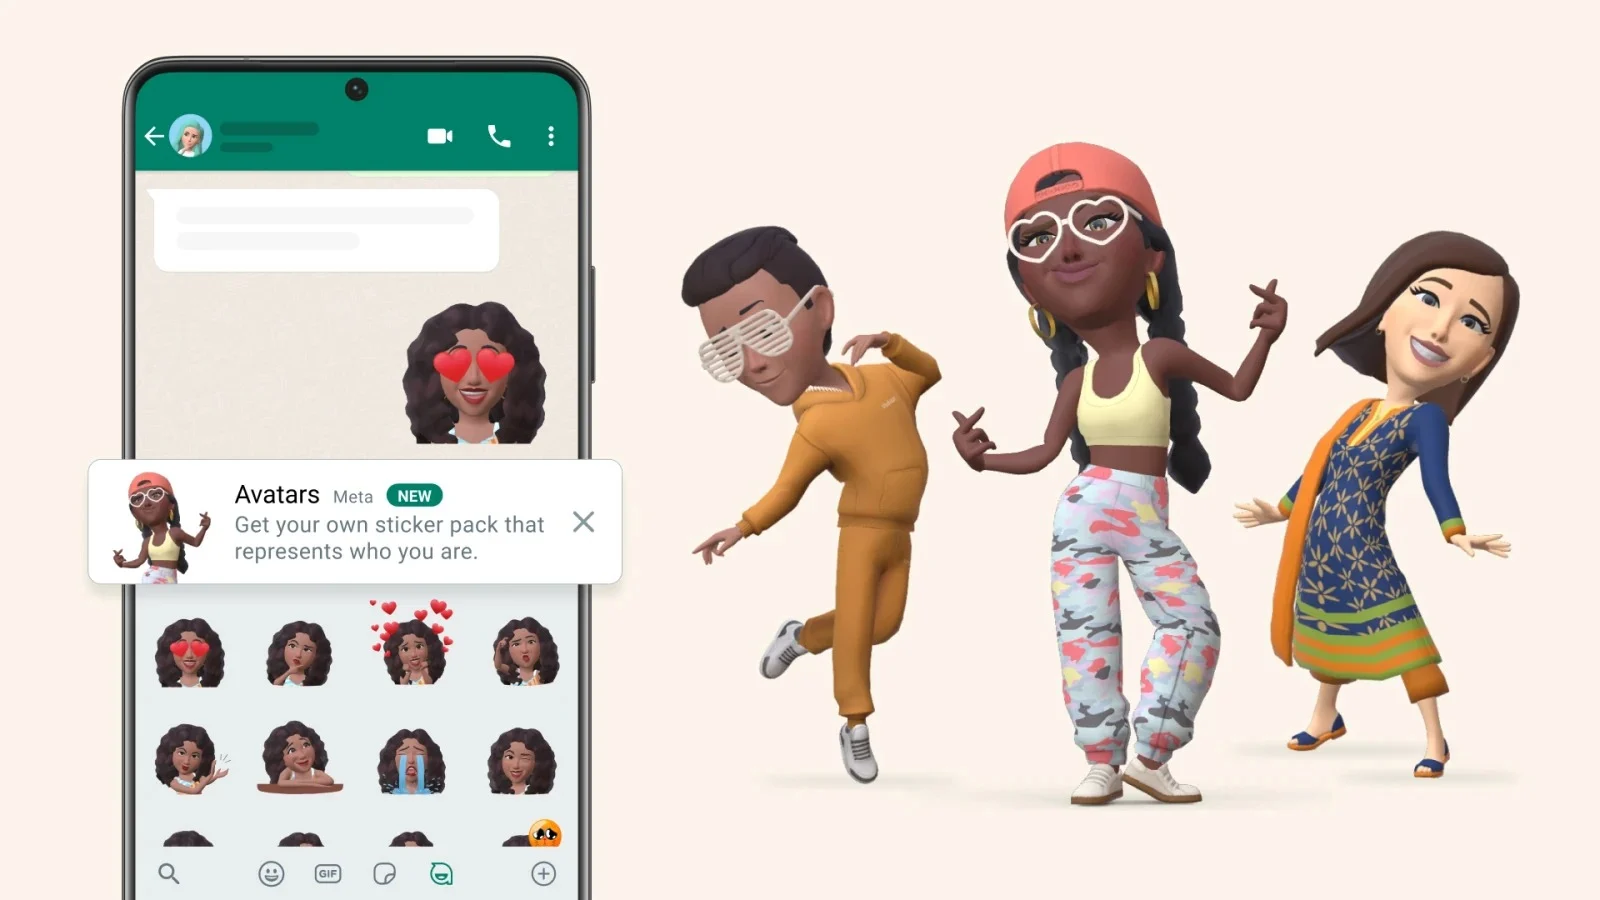 You can now make a 3D Avatar in jpg